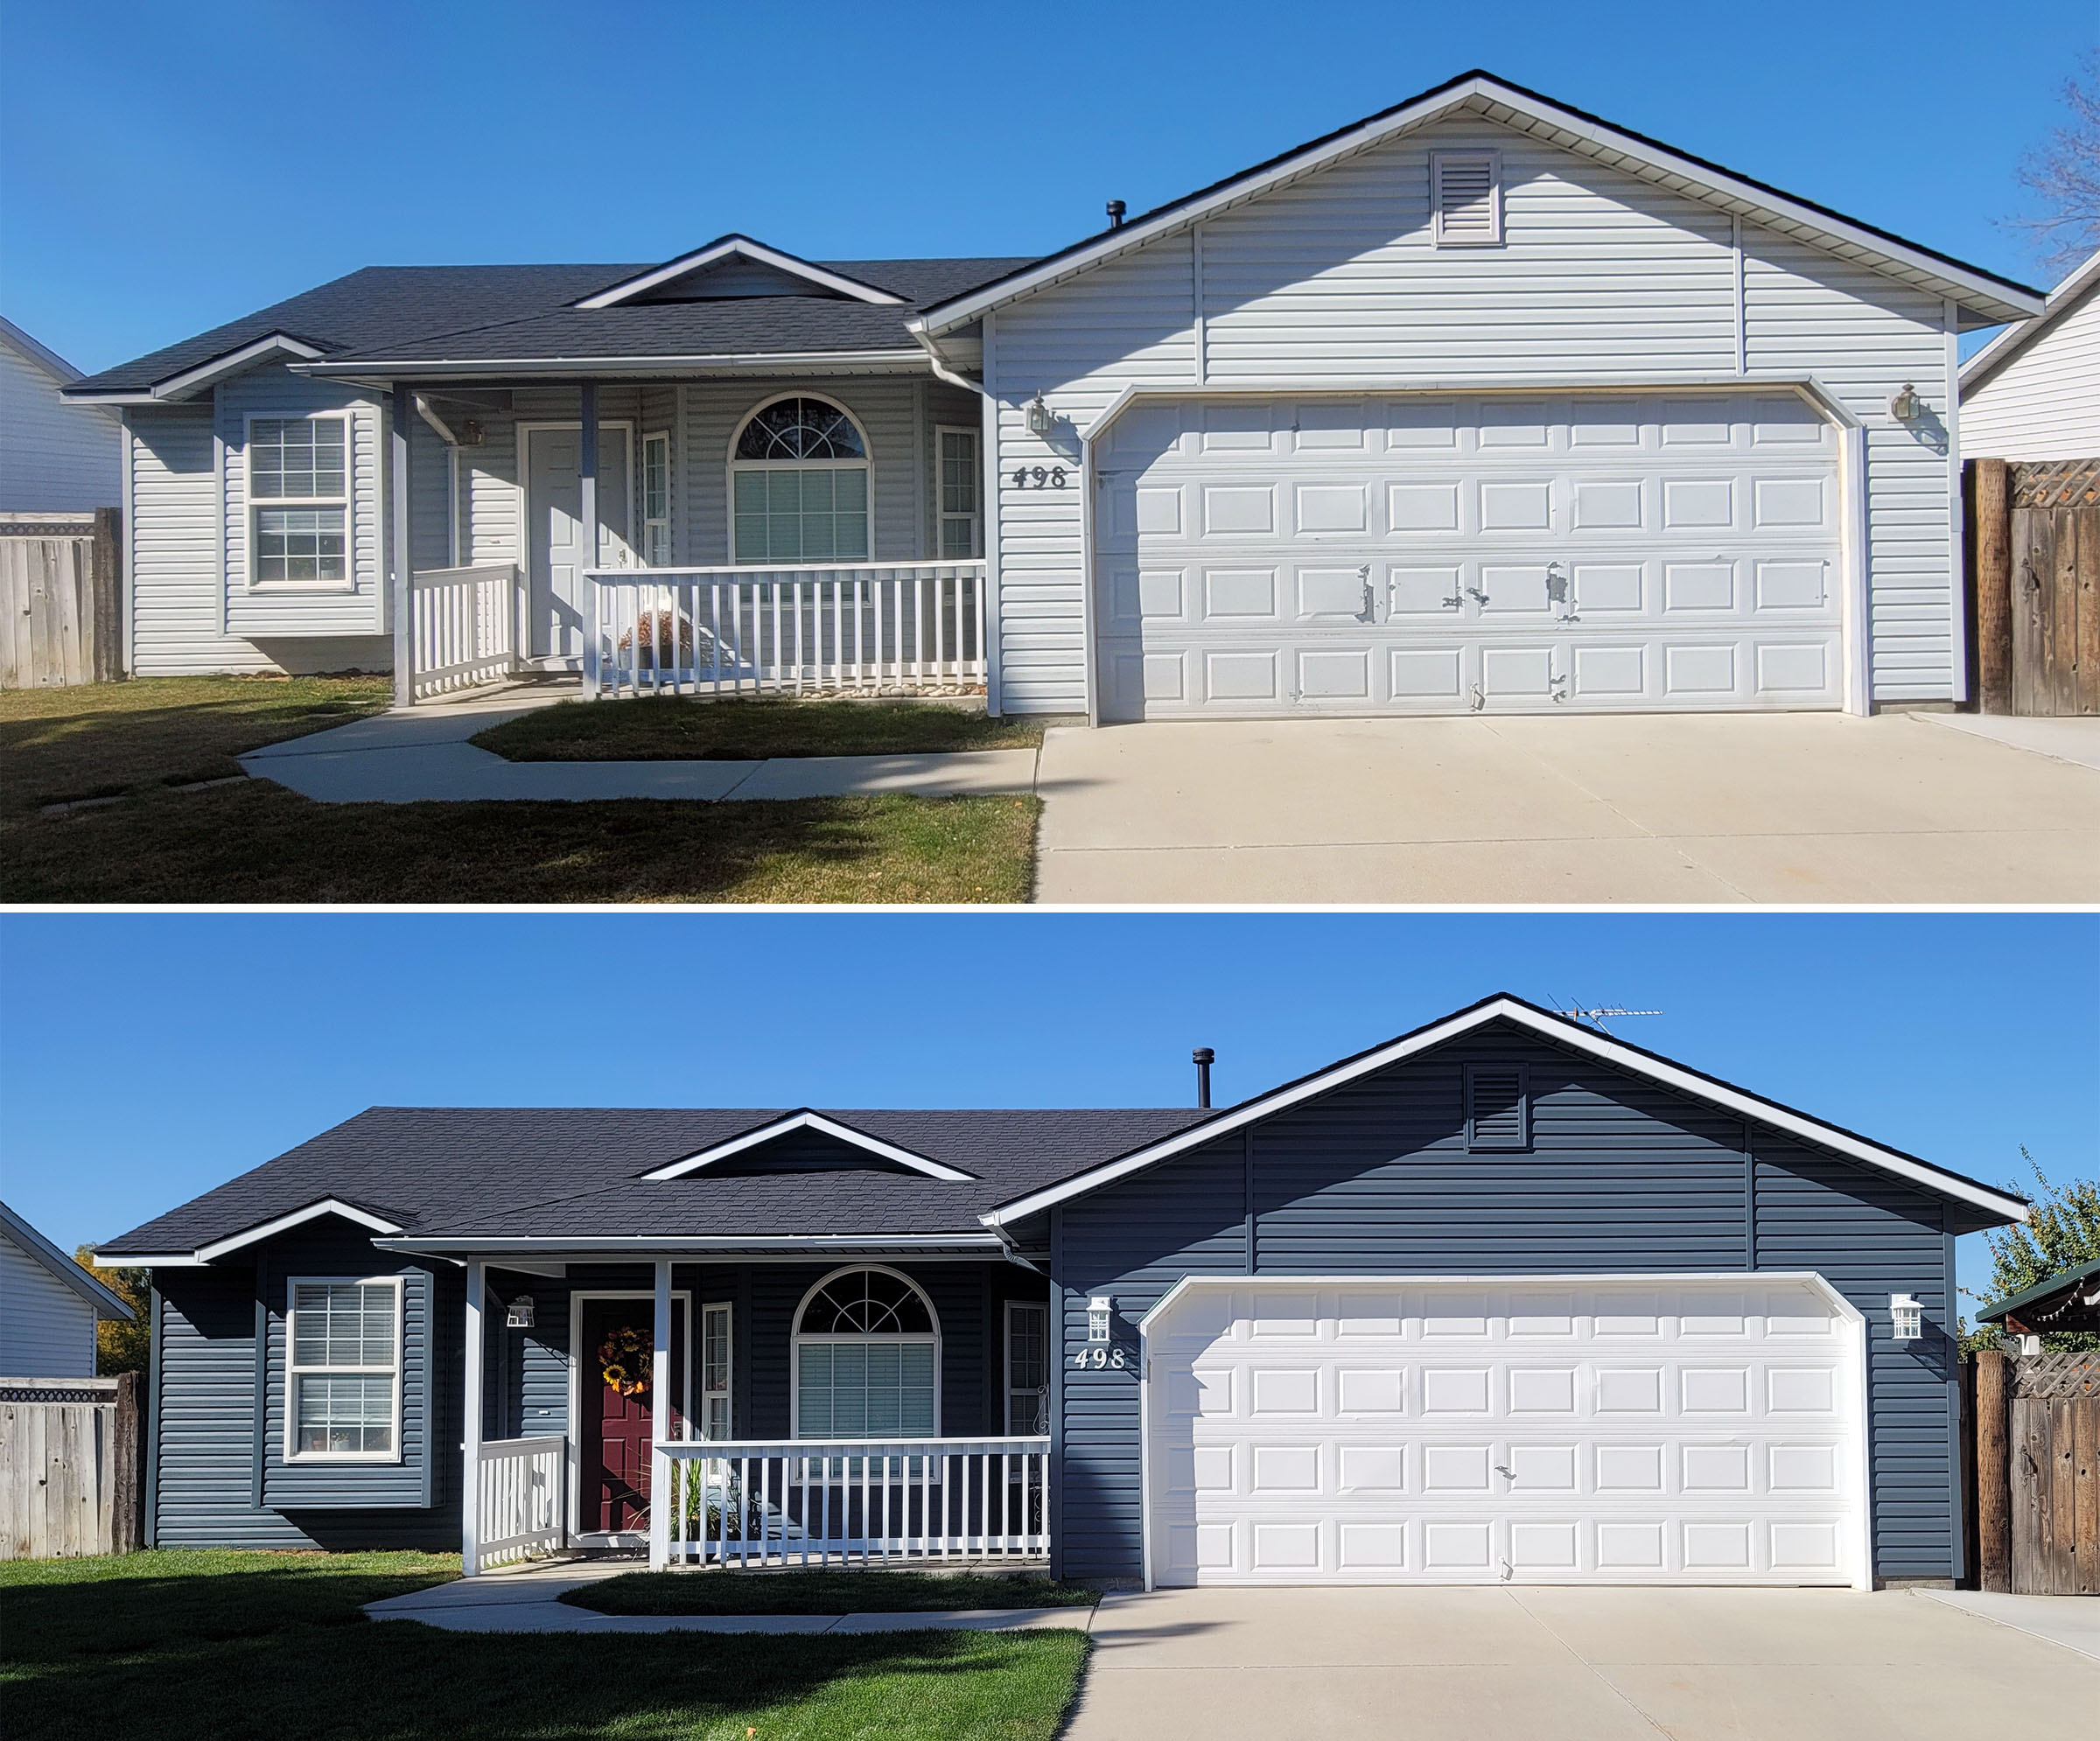 A before and after picture of a house I painted